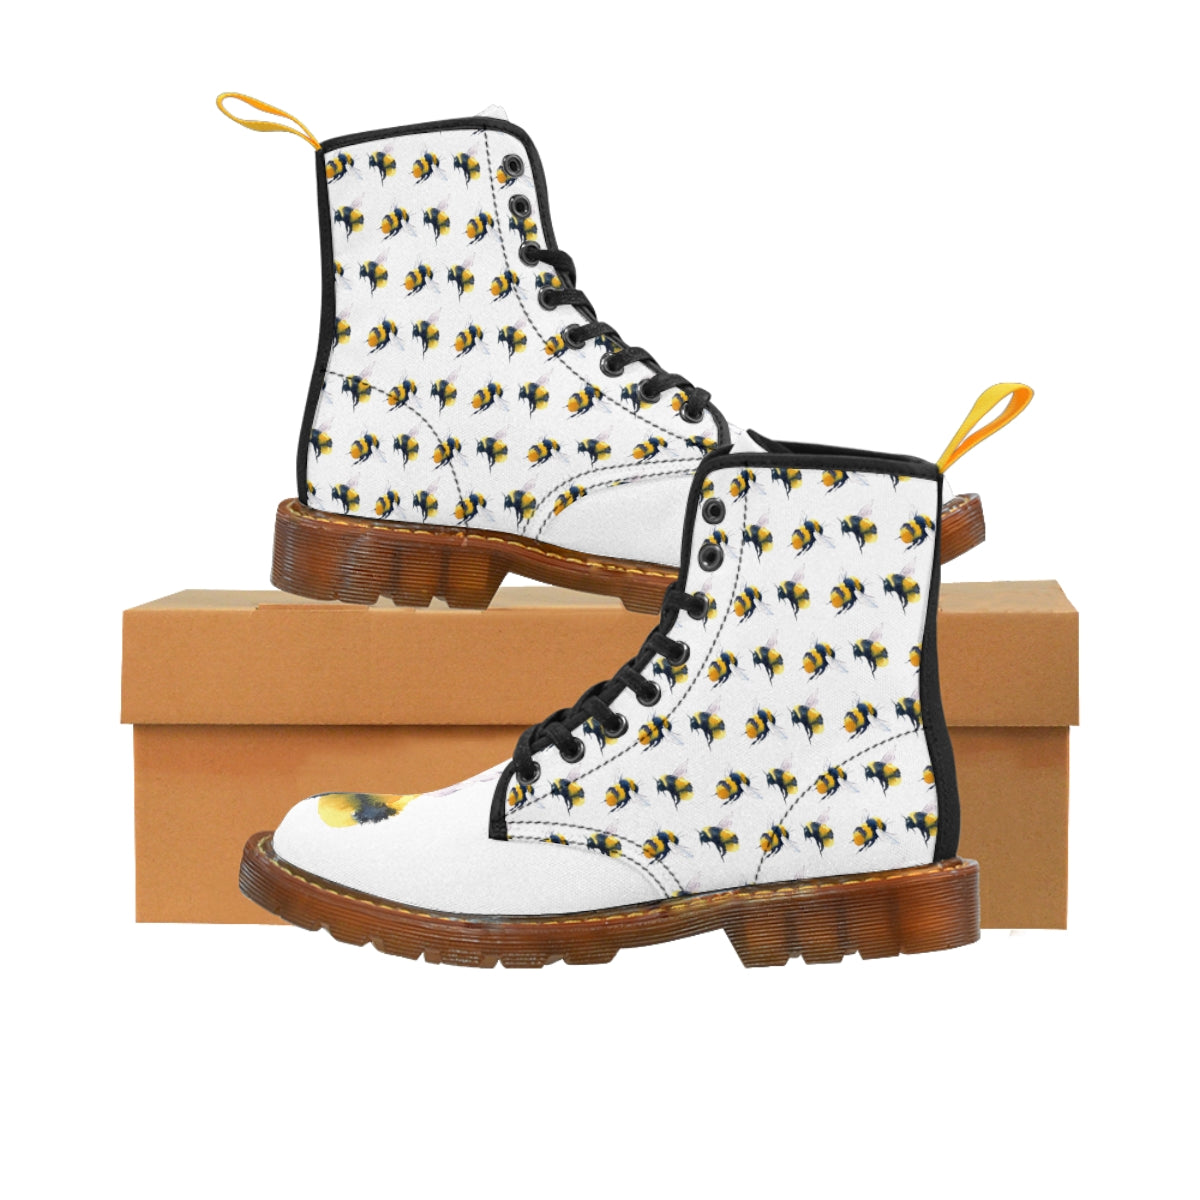 Friendly Flying Bees Women's White Canvas Boots Shoes Bee boots combat boots fun womens boots original art boots Shoes unique womens boots vegan boots vegan combat boots womens boots womens fashion boots